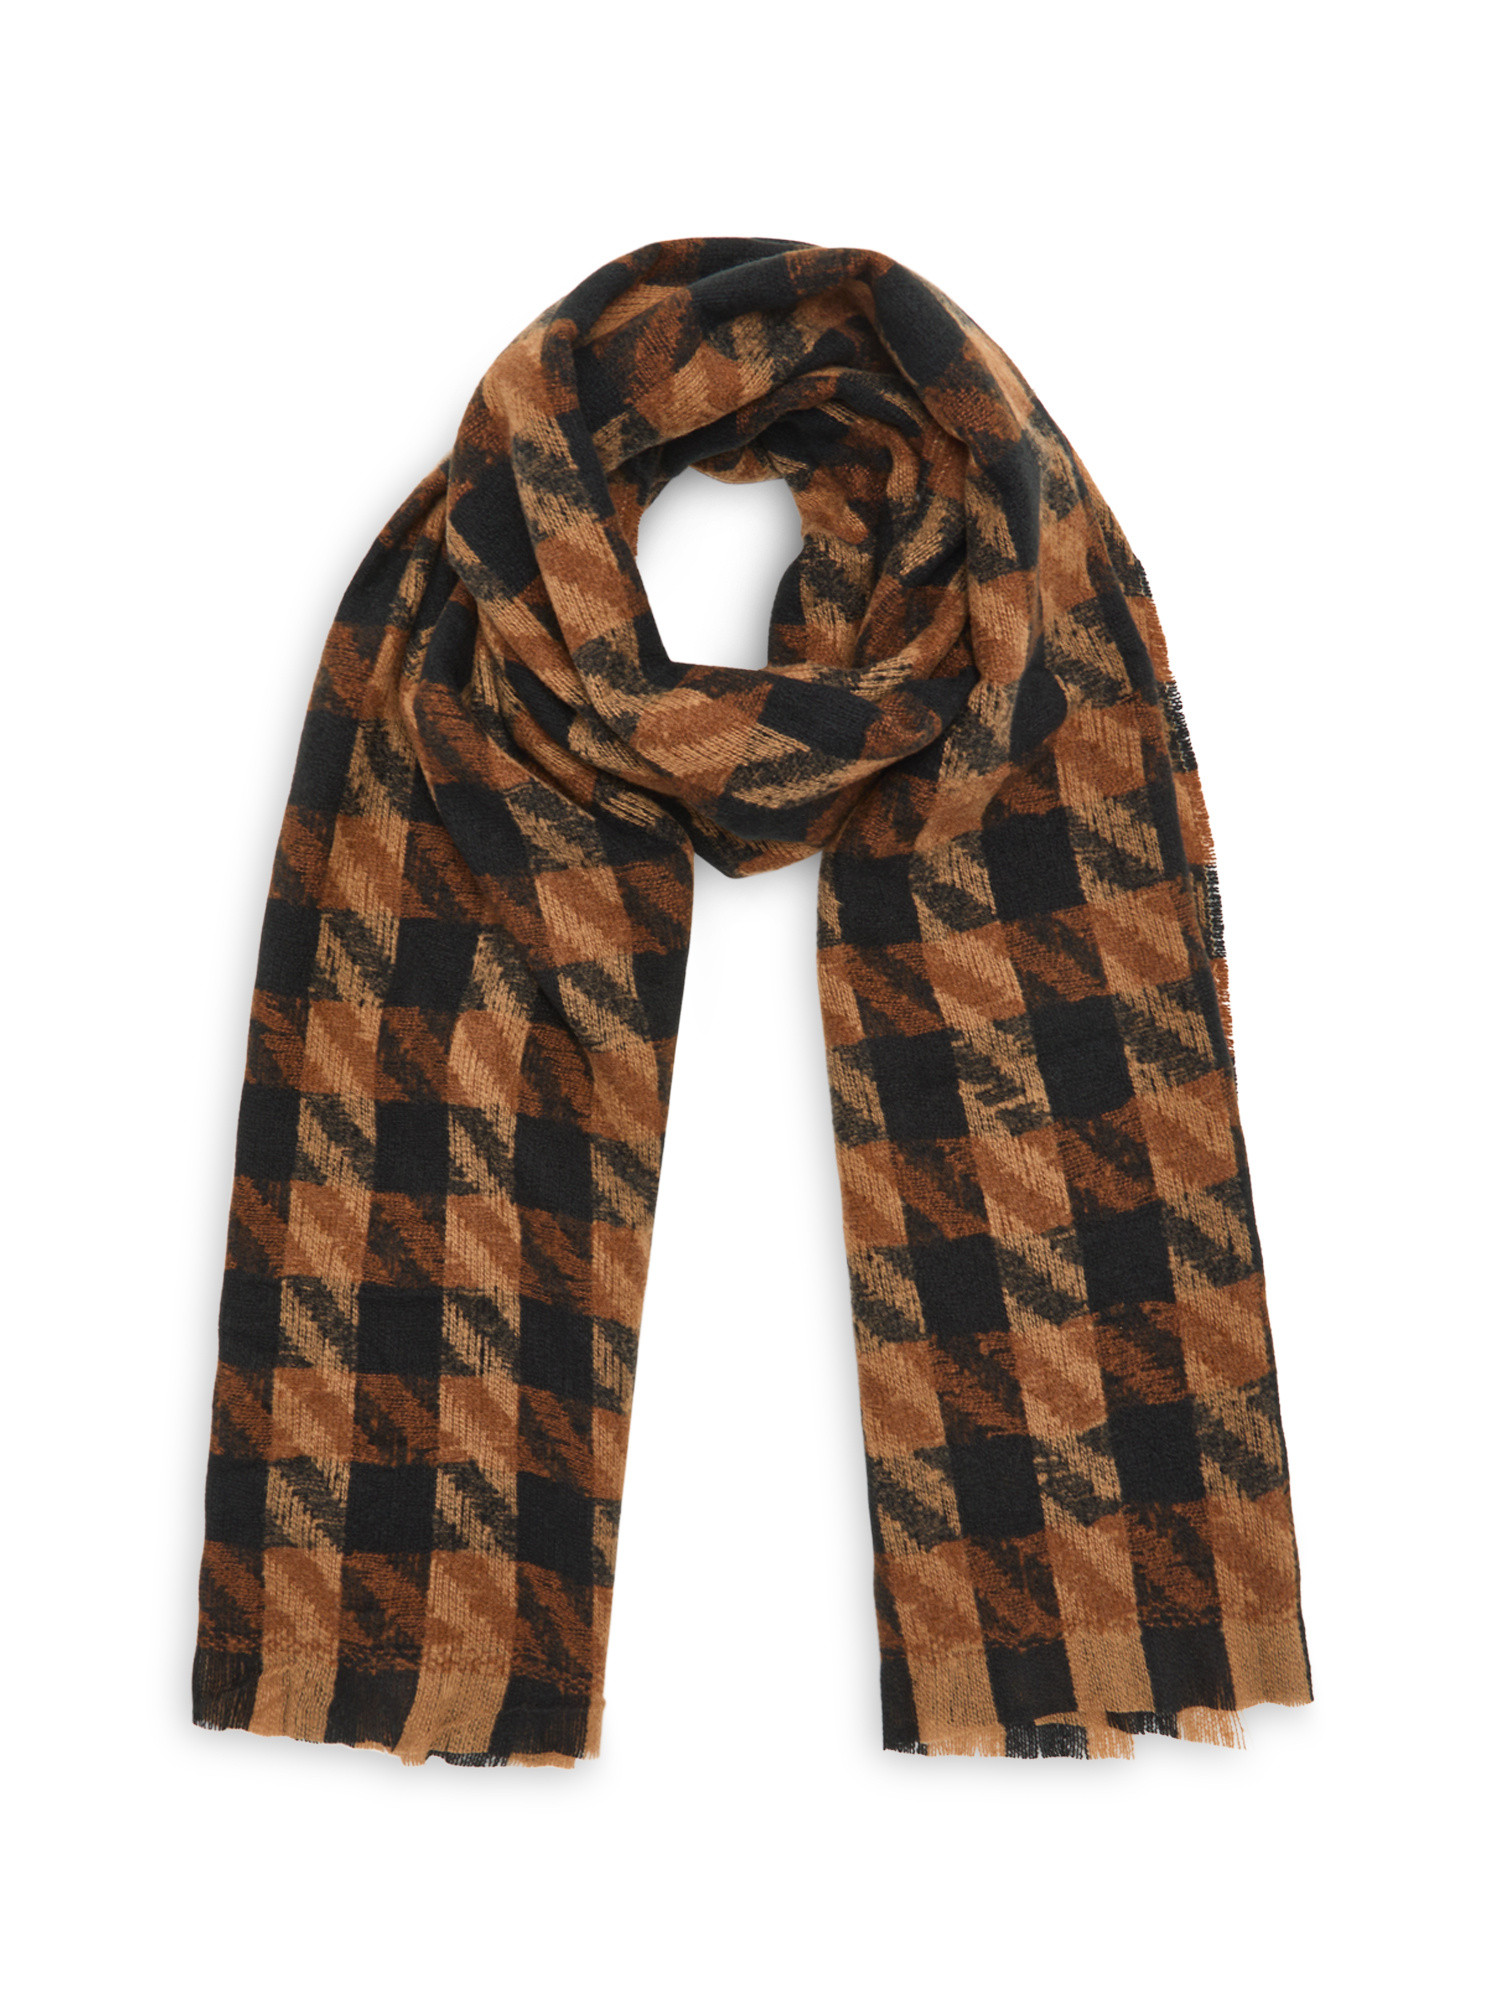 Koan - Puzzle effect checked scarf, Black, large image number 0